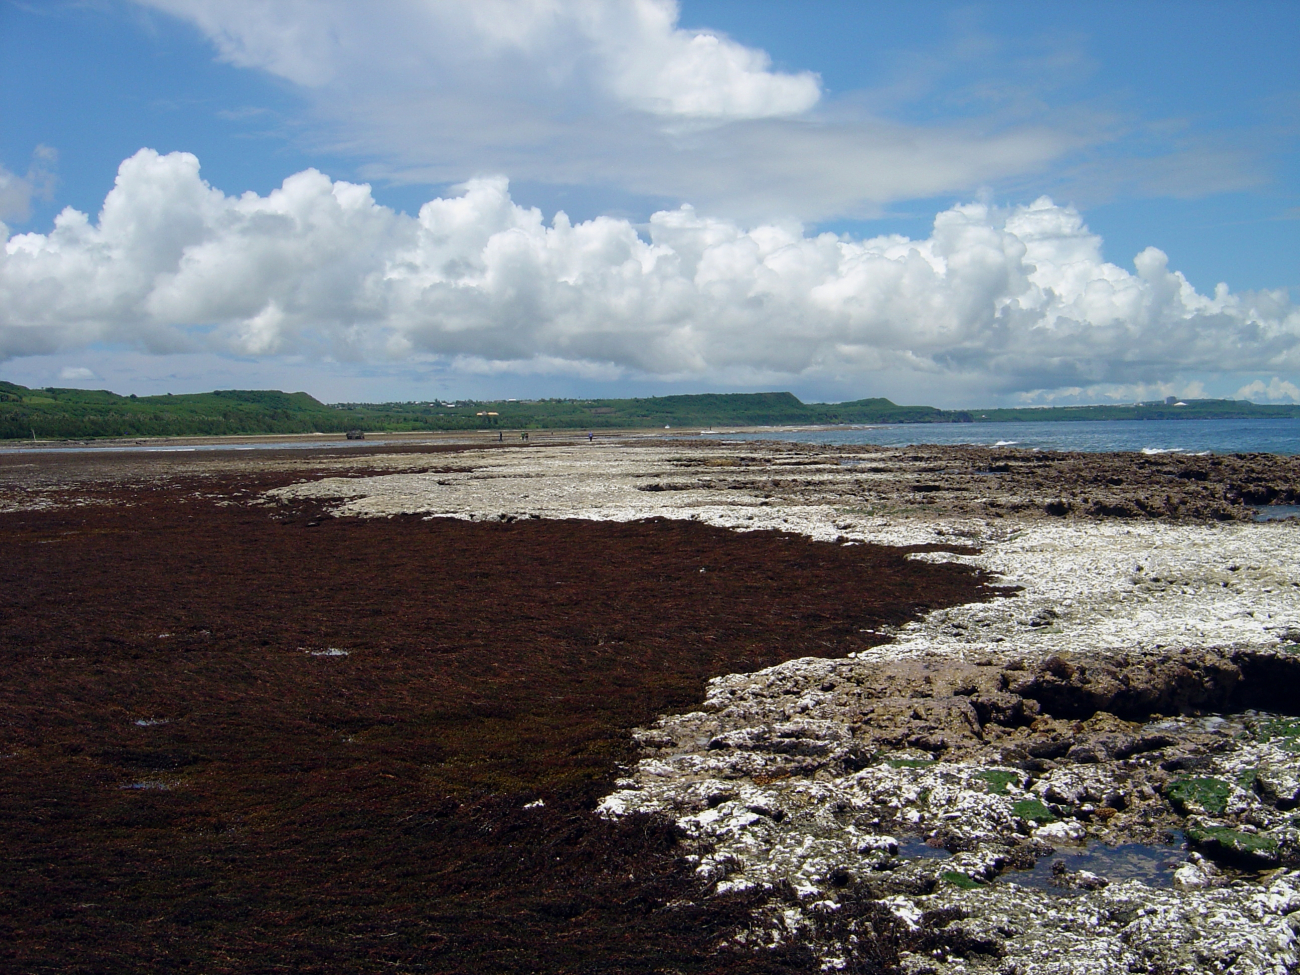 Uncovered reef flat with area of brown algae at low tide on the Guam coastline